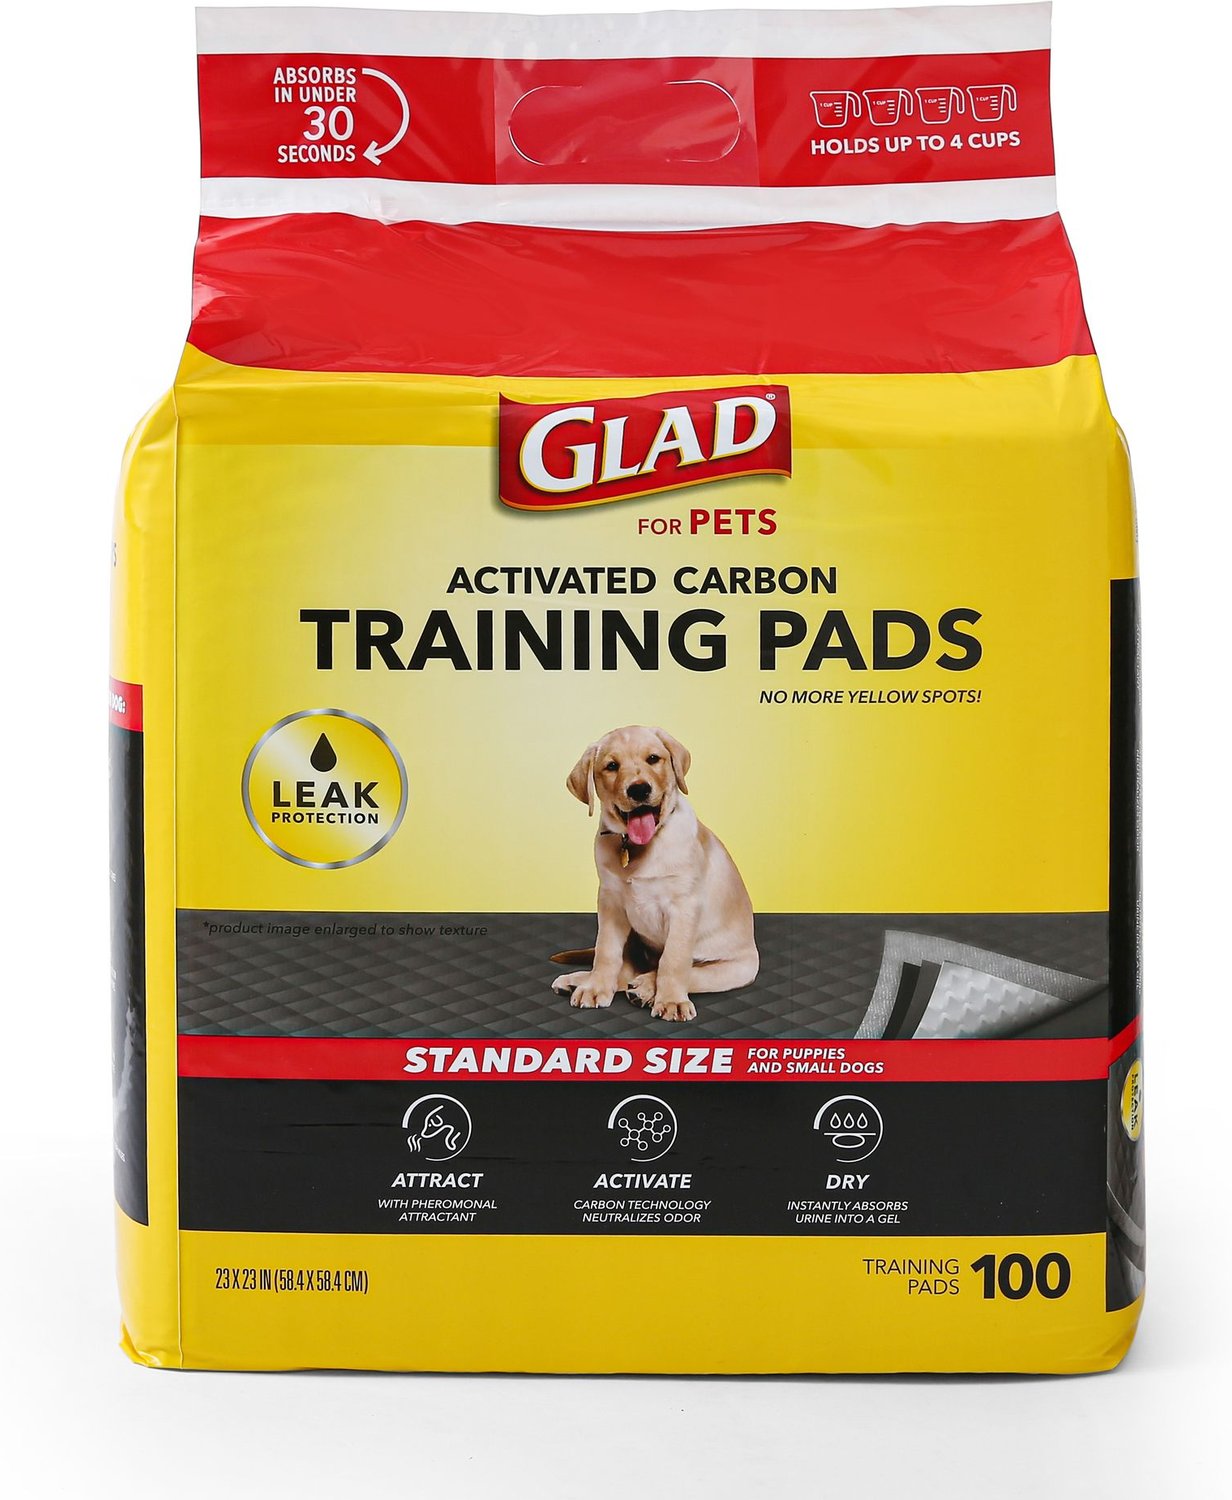 Glad for Pets Activated Carbon Puppy Training Pads